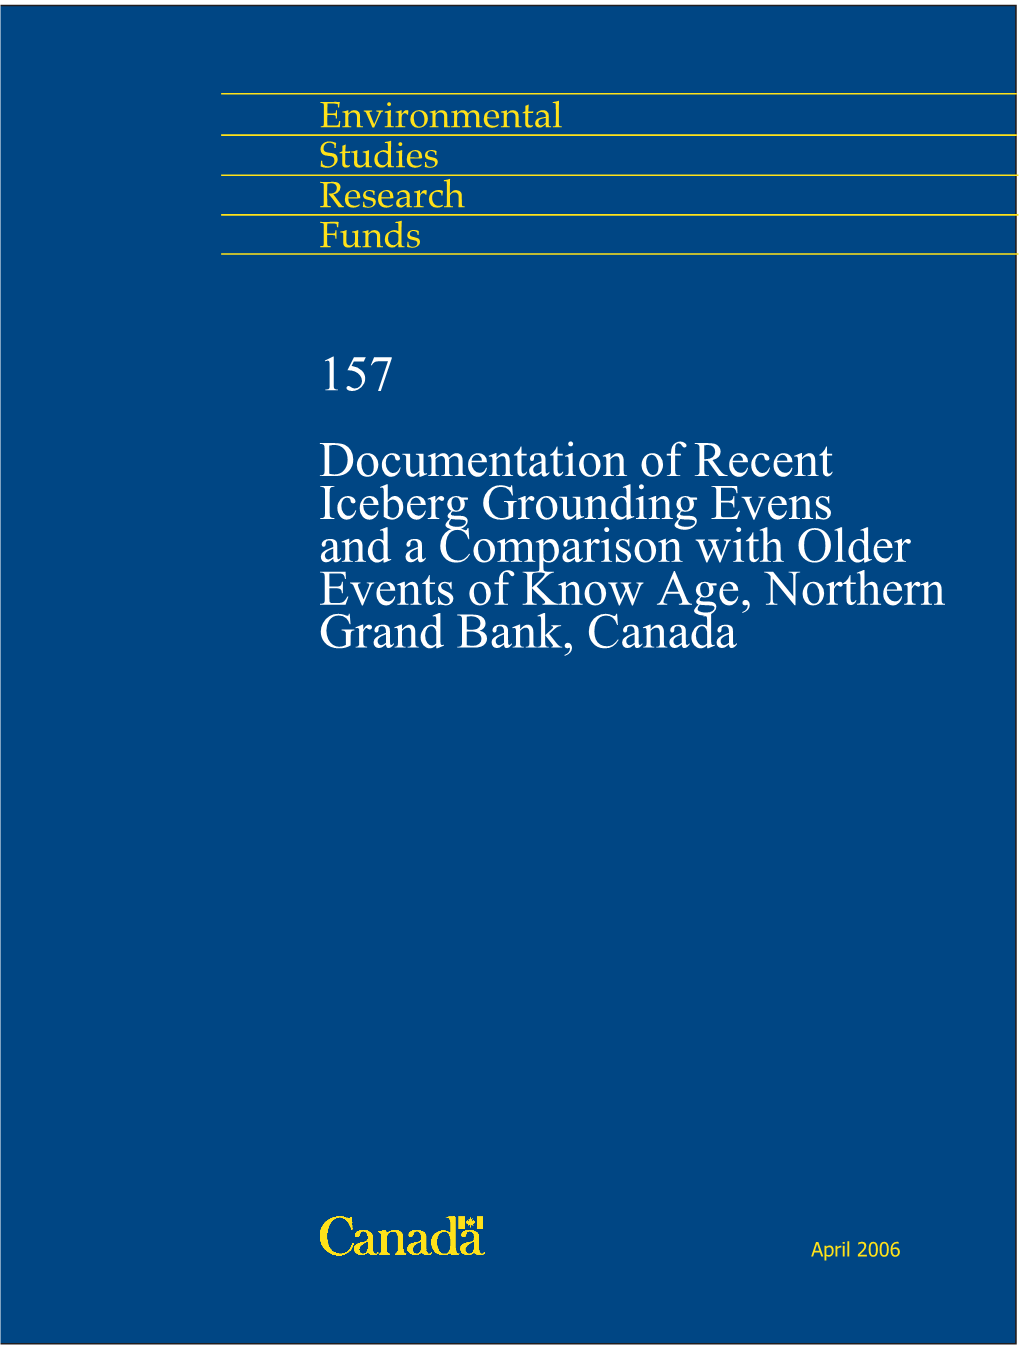 Documentation of Recent Grand Banks Iceberg Grounding Events and a Comparison with Older Events of Known